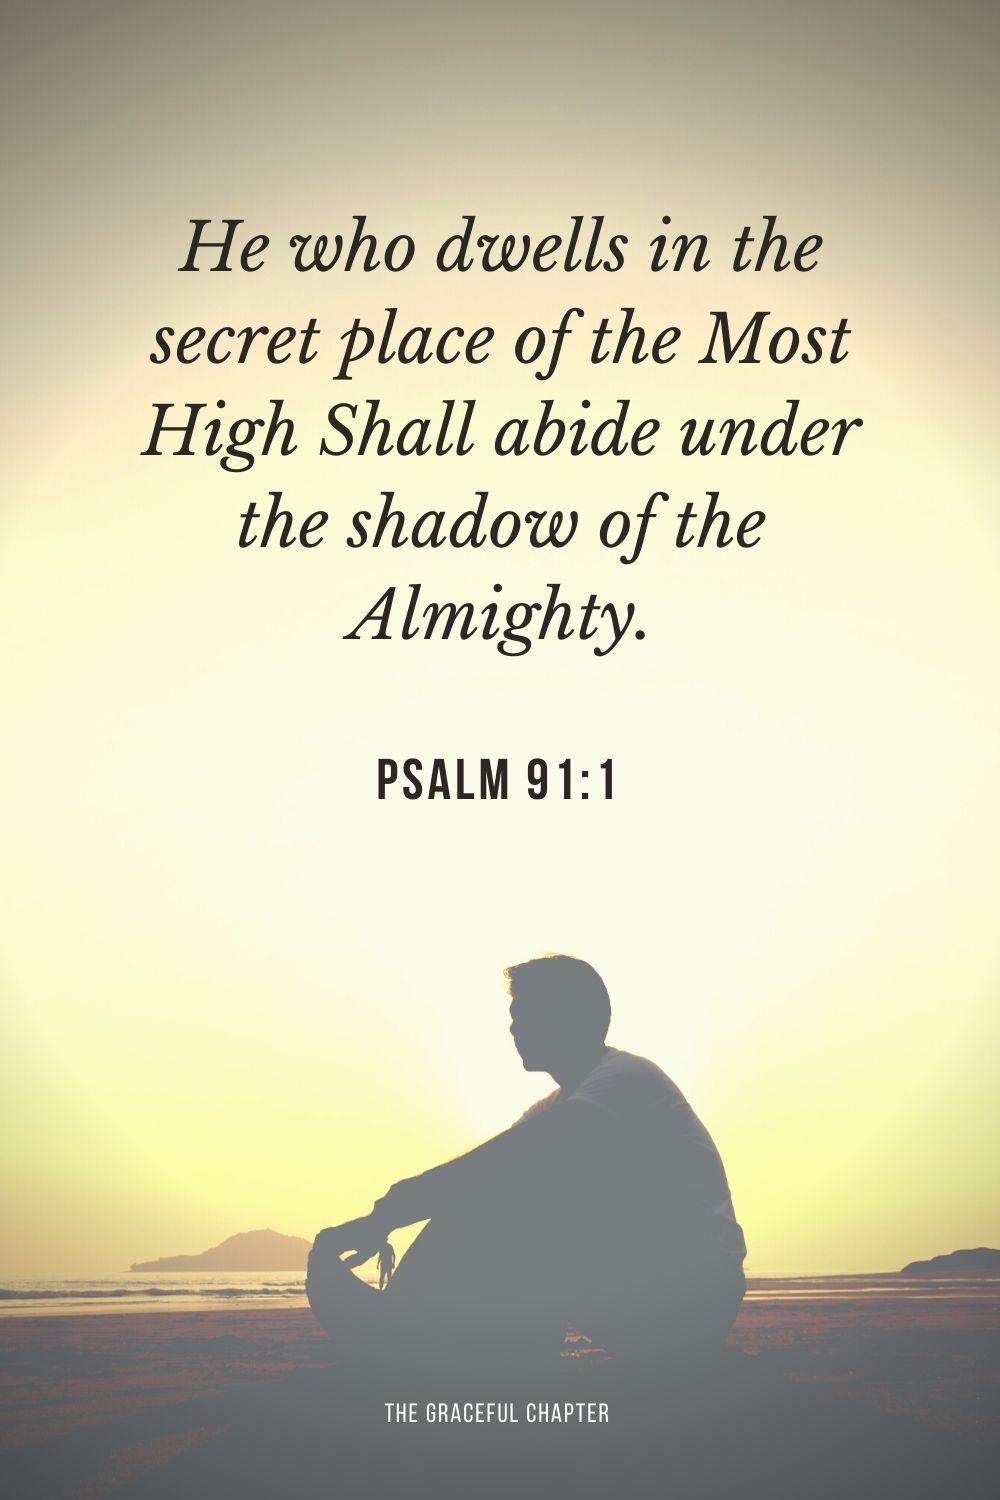 He who dwells in the secret place of the Most High Shall abide under the shadow of the Almighty. Psalm 91:1